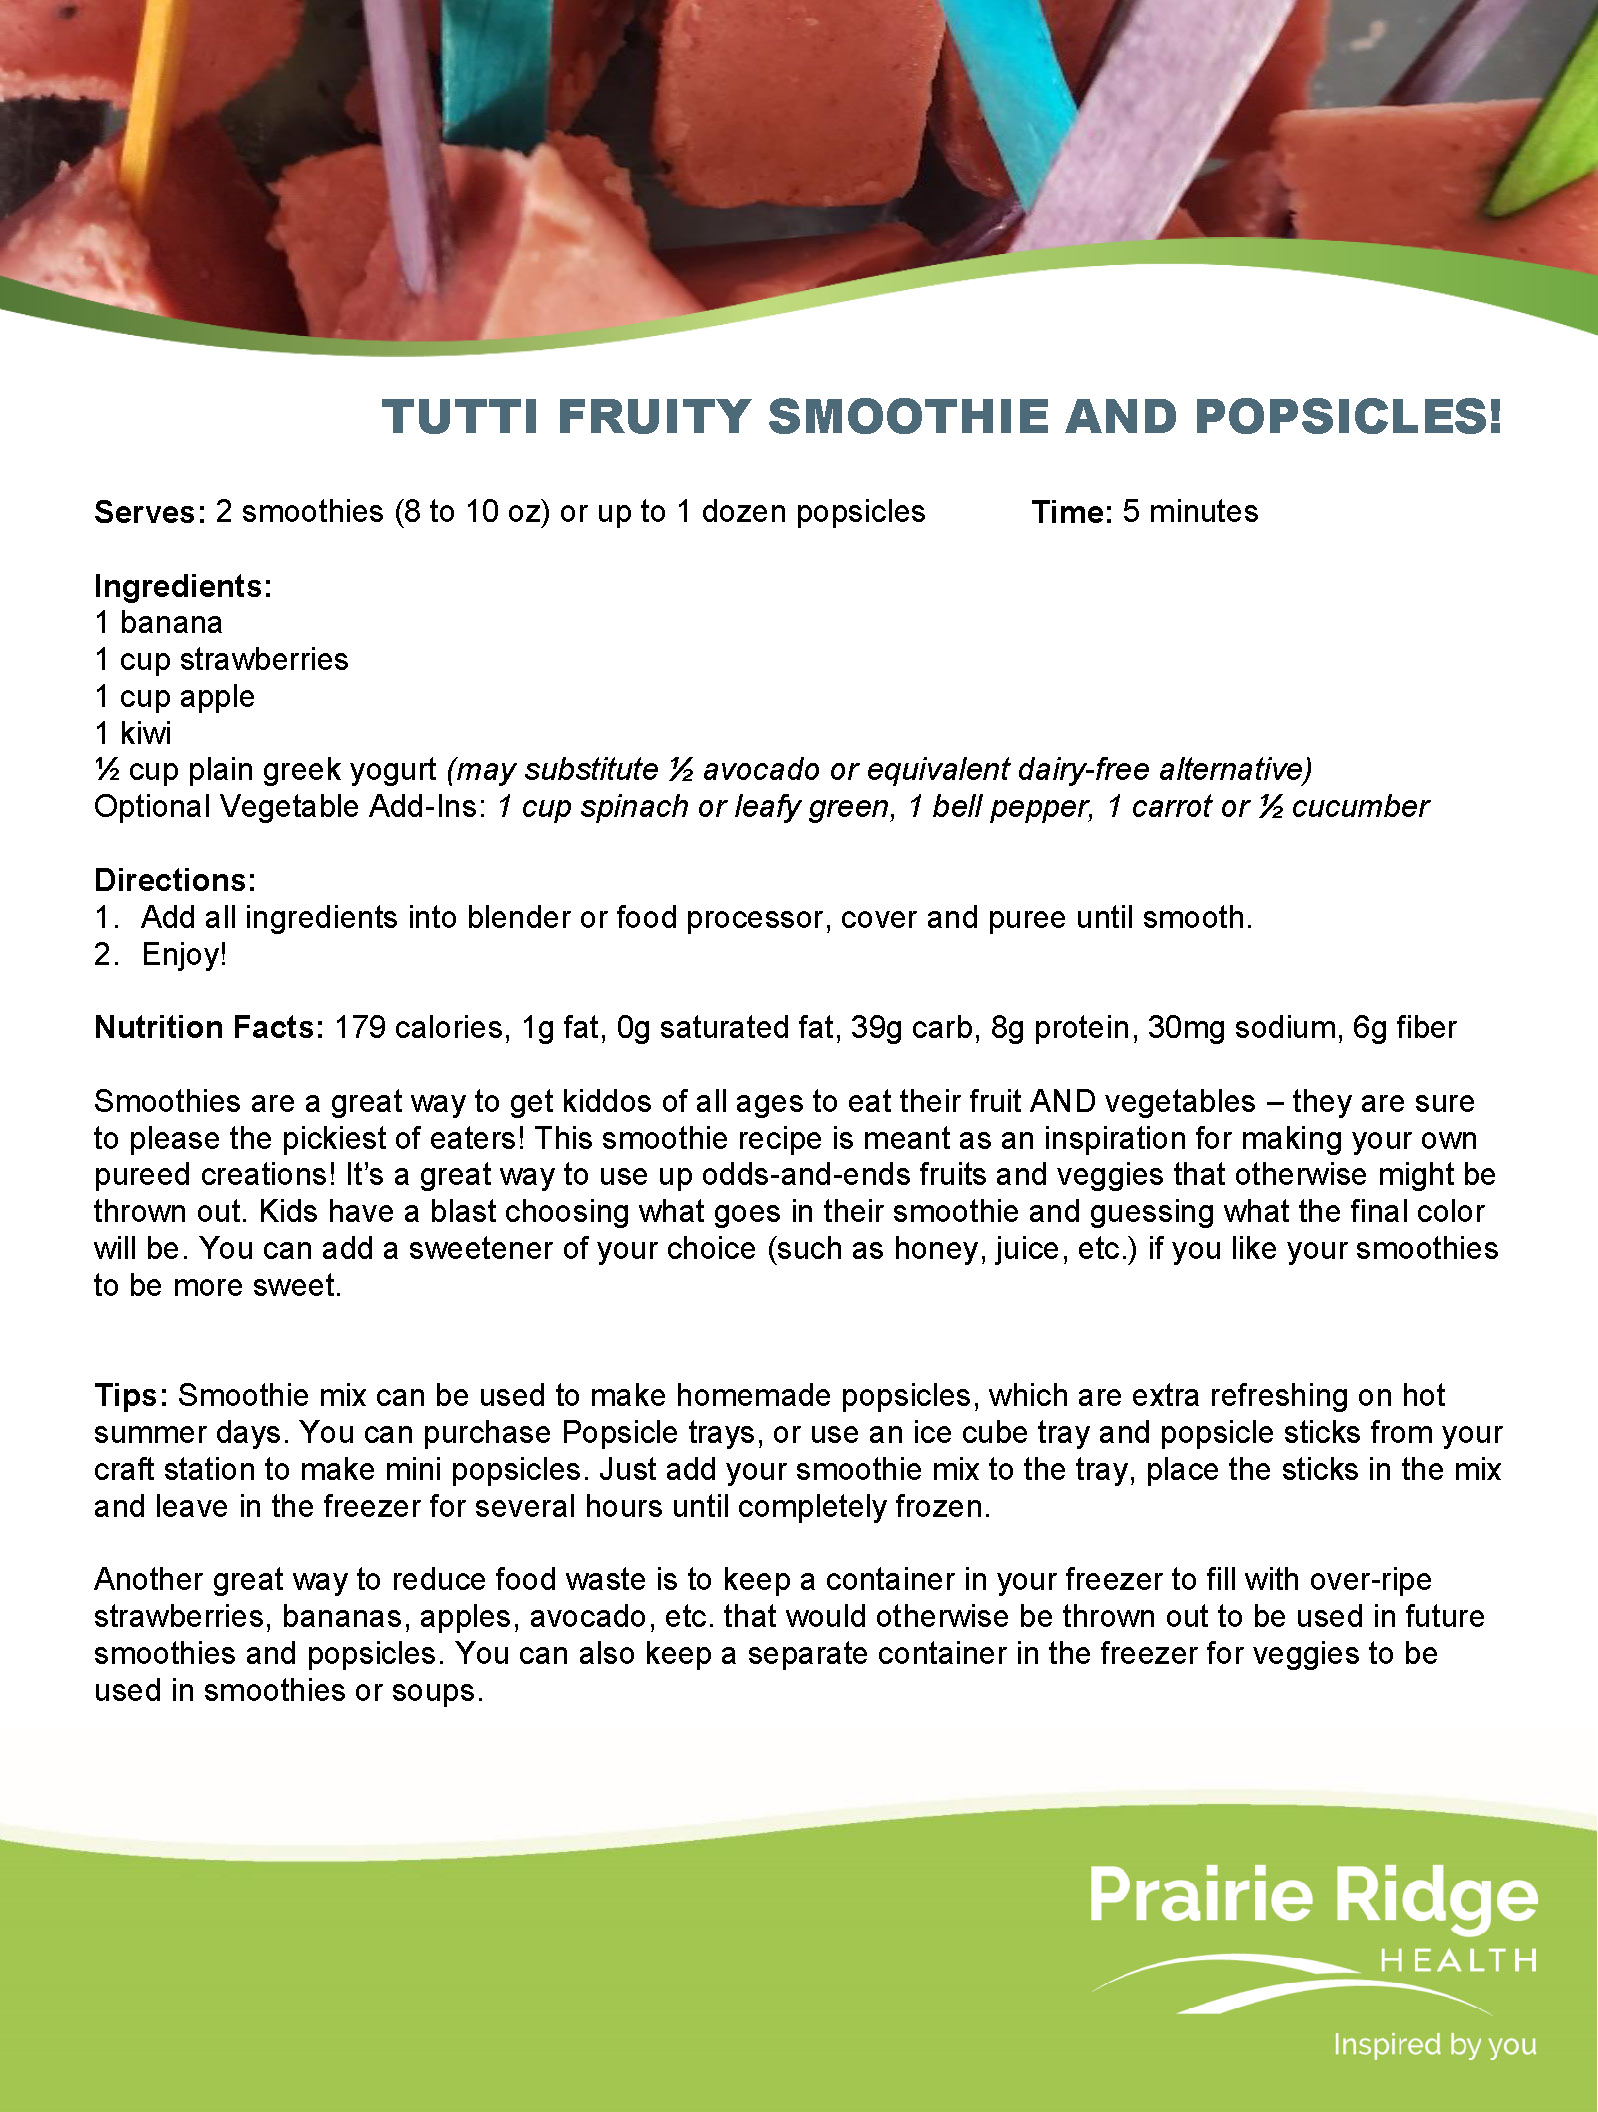 Tutti Fruitti Smoothie and Popsicles